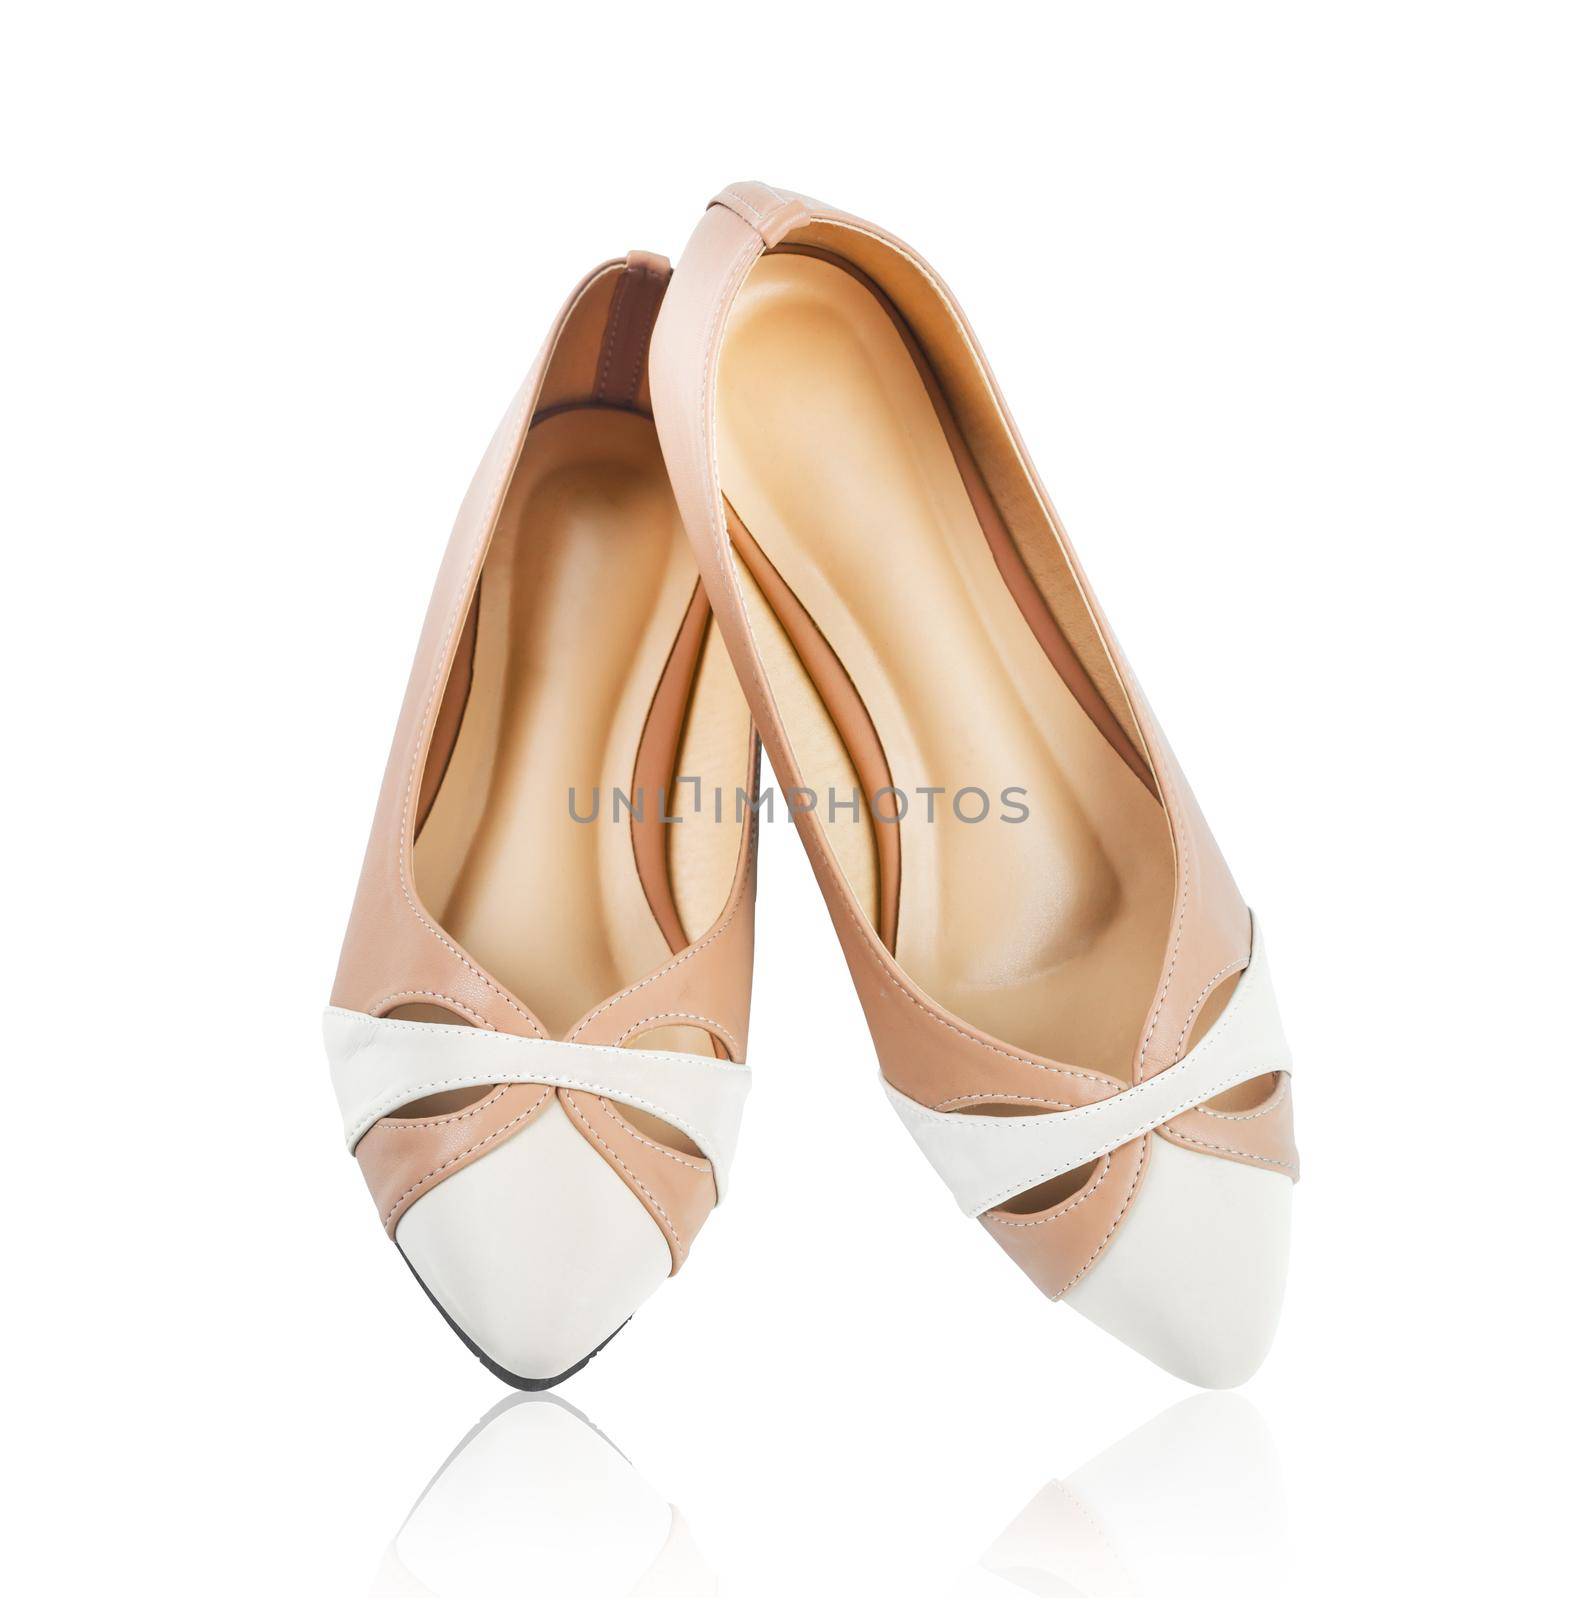 Pair of beige women's shoes isolated on a white background, Save clipping path. by Gamjai